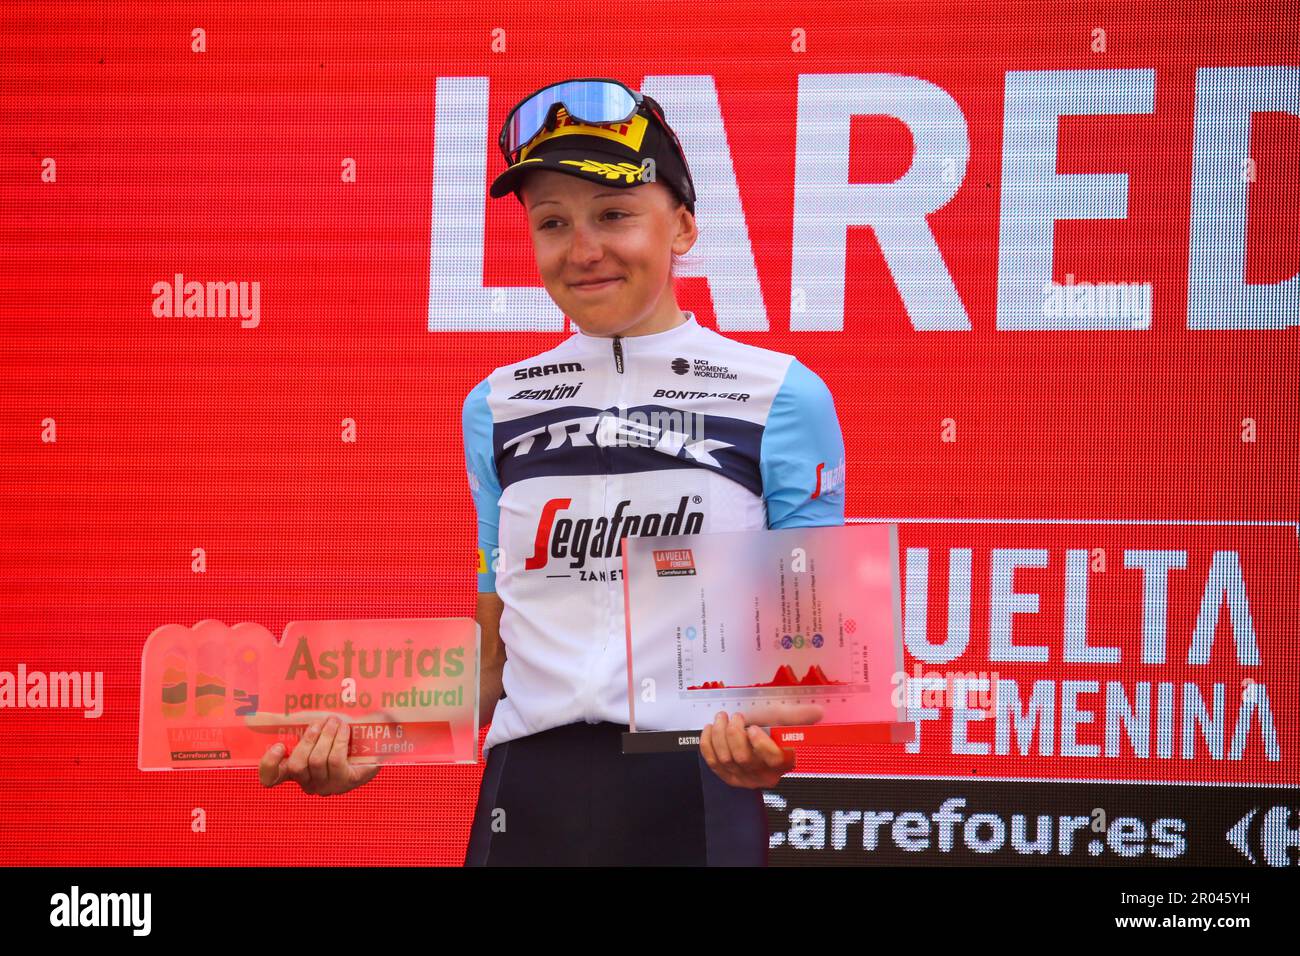 Laredo, Spain, 06th May, 2023: The Trek - Segafredo cyclist, Gaia Realini as the winner of the stage during the 6th stage of women's LaVuelta by Carrefour 2023 between Castro-Urdiales and Laredo, on May 06, 2023, in Laredo, Spain. Credit: Alberto Brevers / Alamy Live News Stock Photo